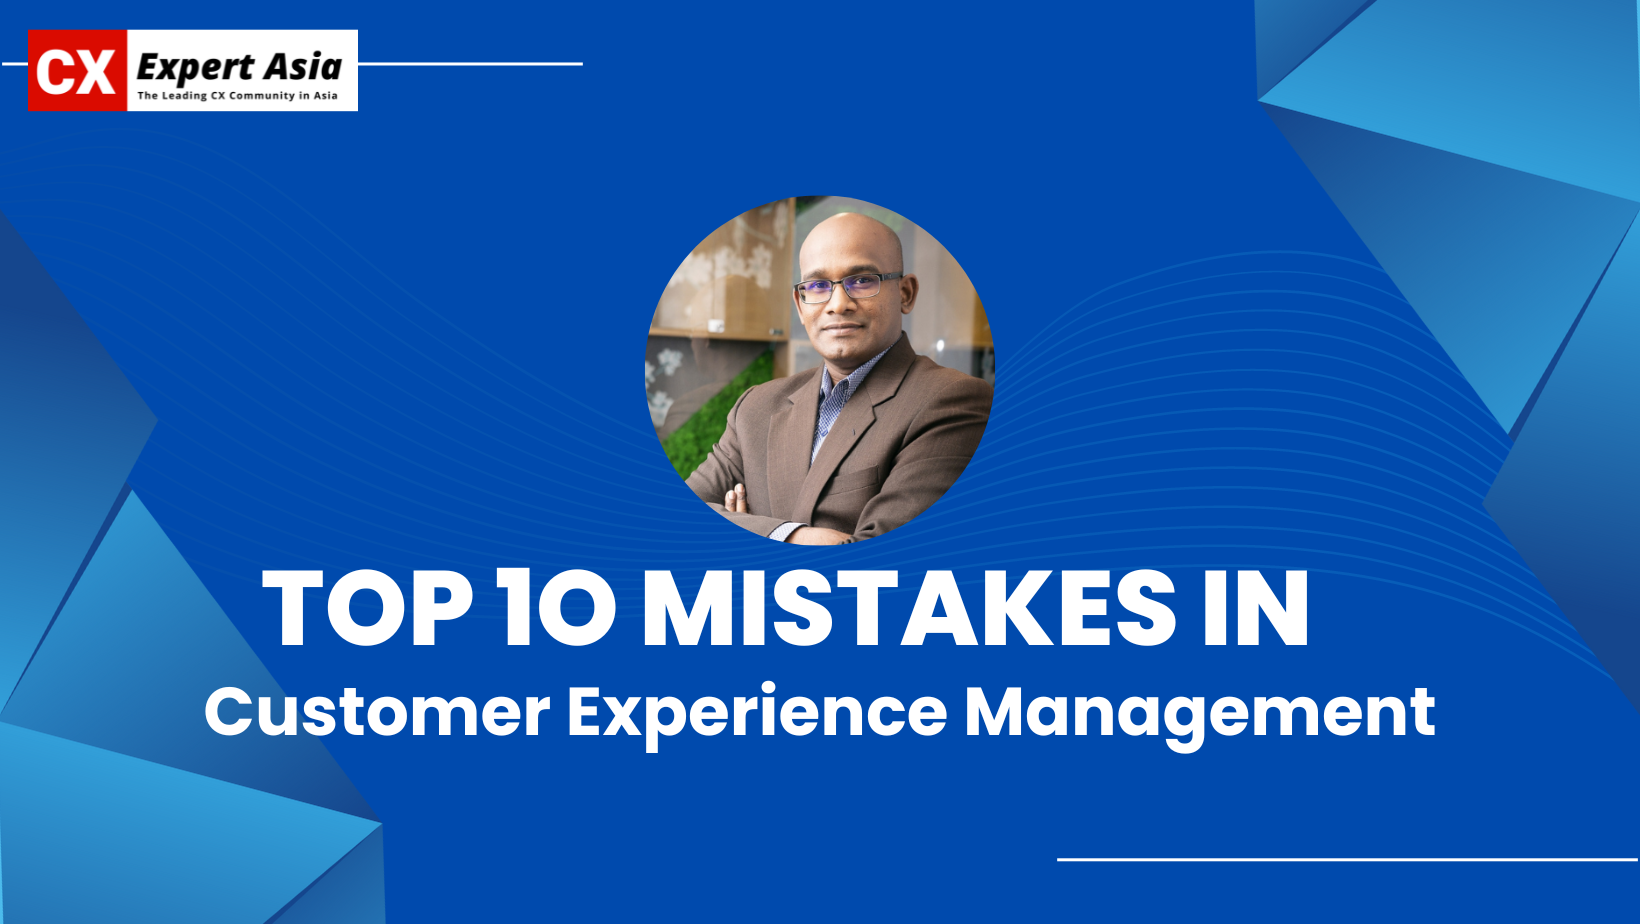 Top 10 Mistakes in Customer Experience Management